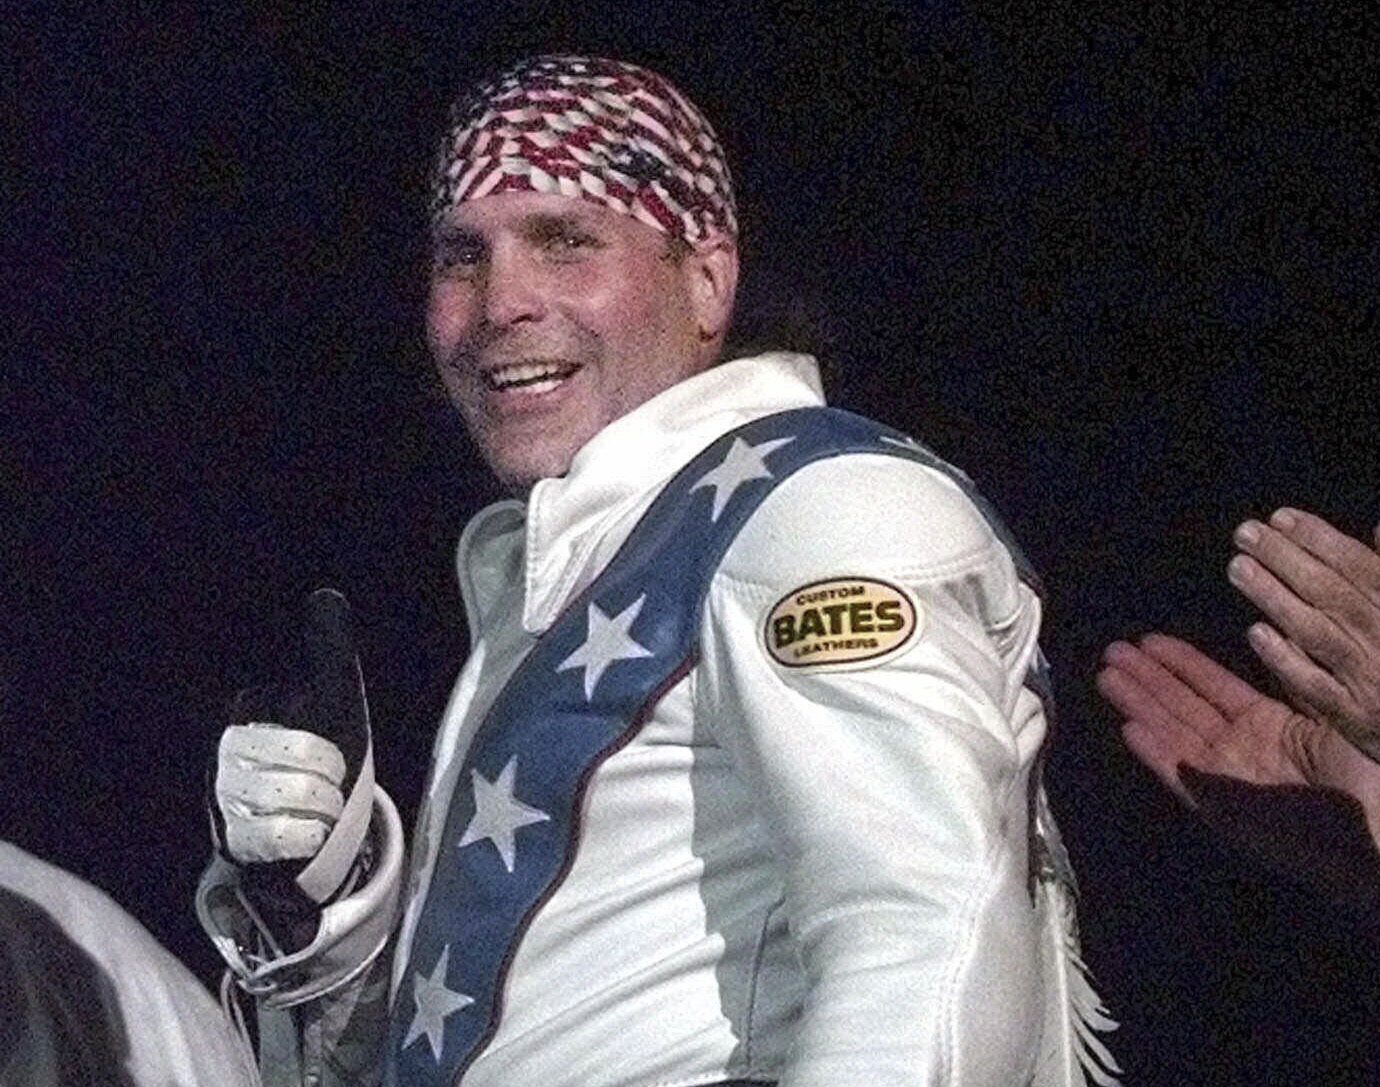 FILE - Robbie Knievel gives a thumbs up after jumping a train at the Texas State Railroad Park in Palestine, Texas on Feb. 23, 2000. Knievel, an American stunt performer, died early Friday at a hospice in Reno, Nev., with his daughters at his side, his brother Kelly Knievel said. He was 60. (AP Photo/LM Otero, File)